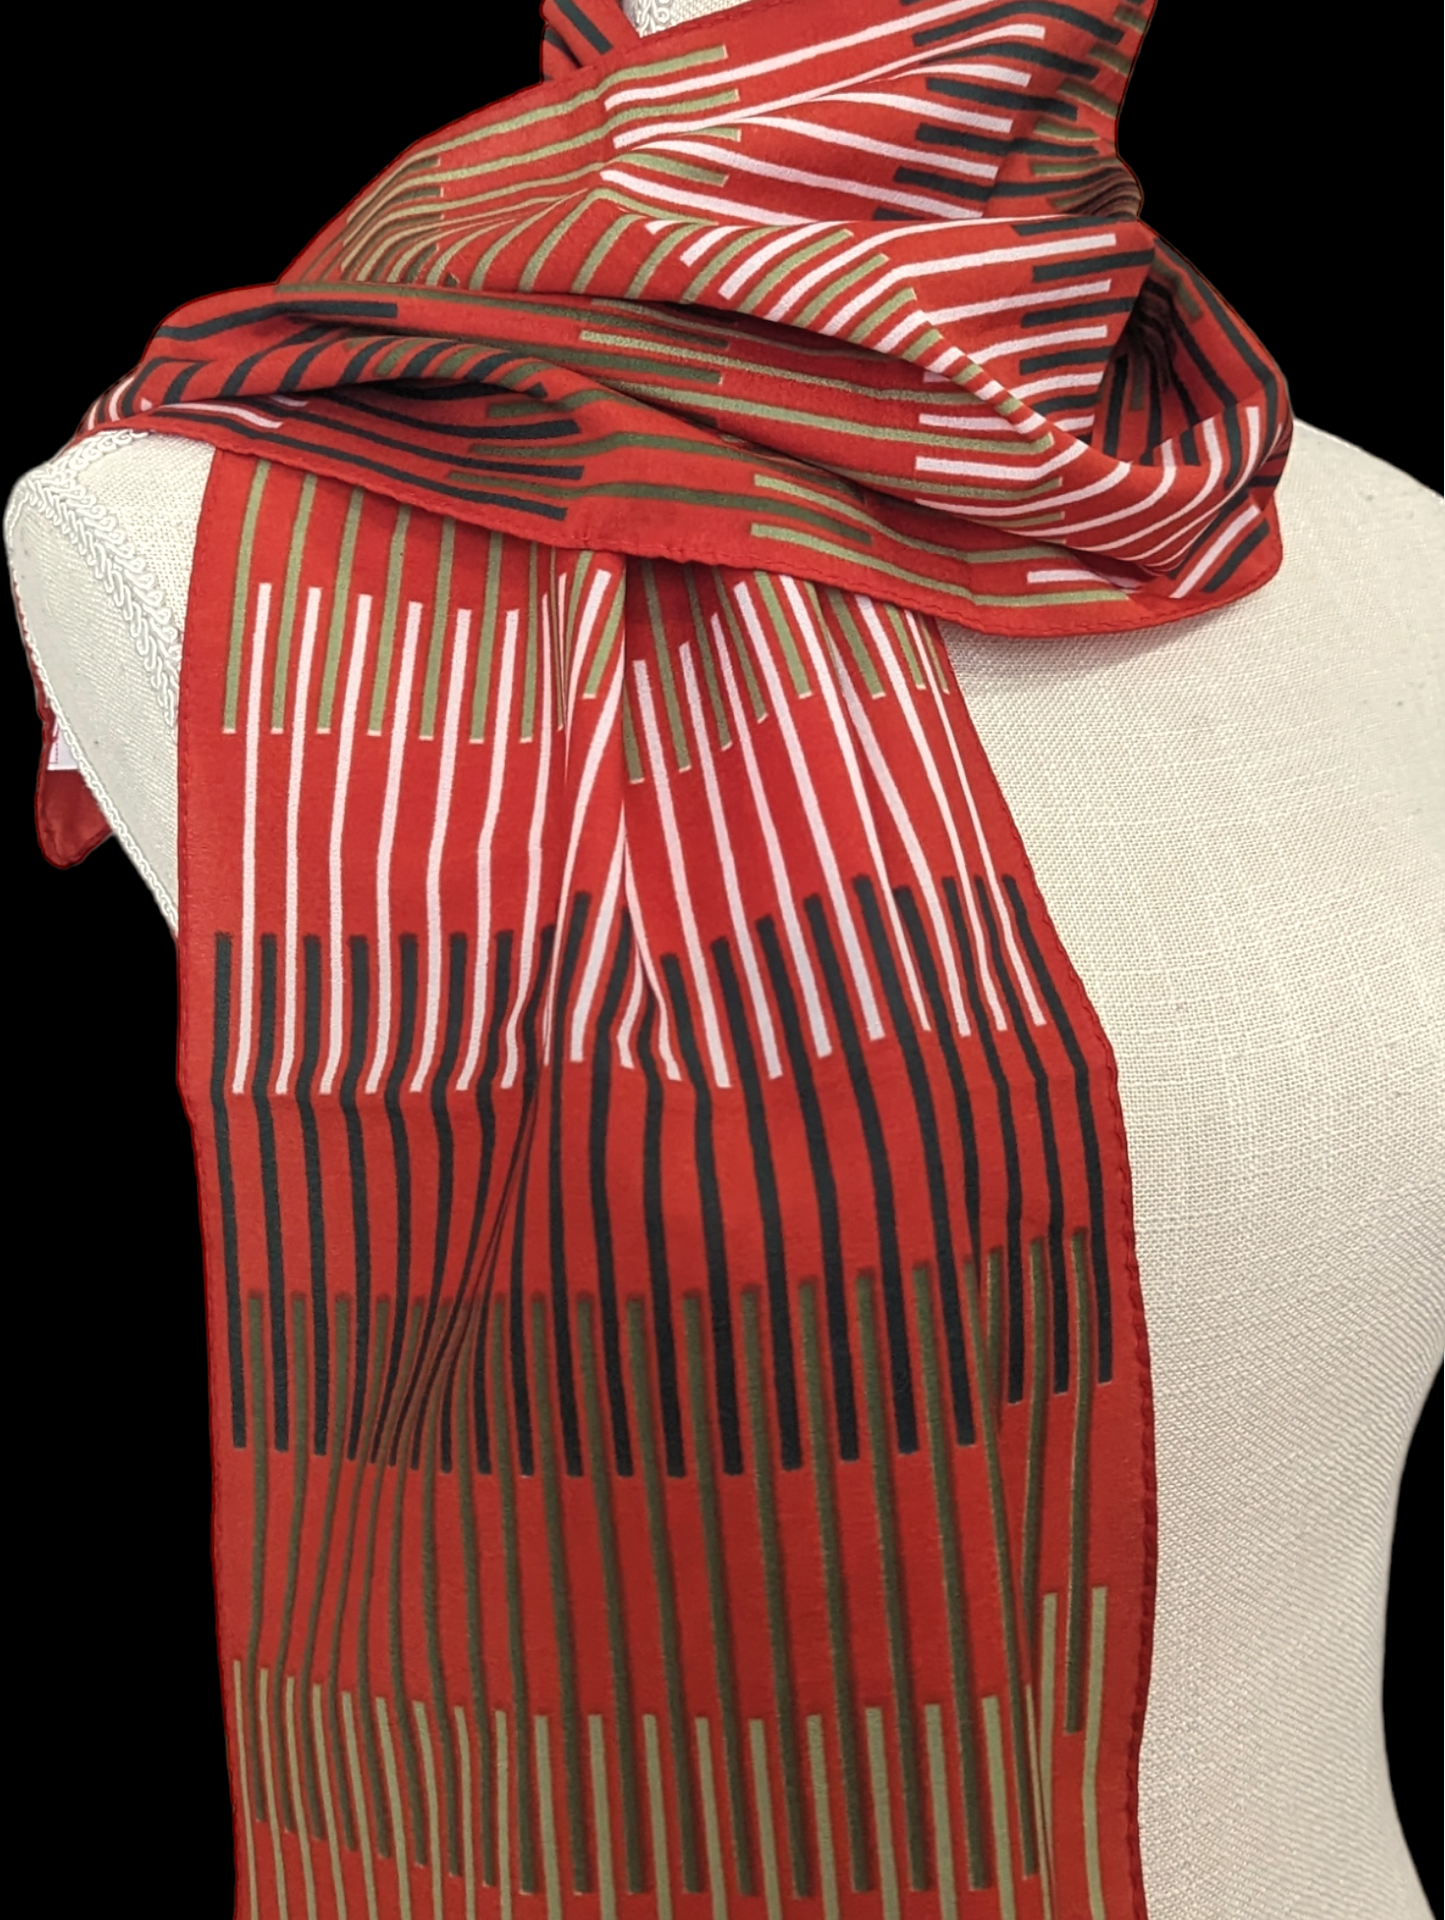 1970s Made in Italy Striped Scarf in Burnt Orange, Olive Green, Brown and White